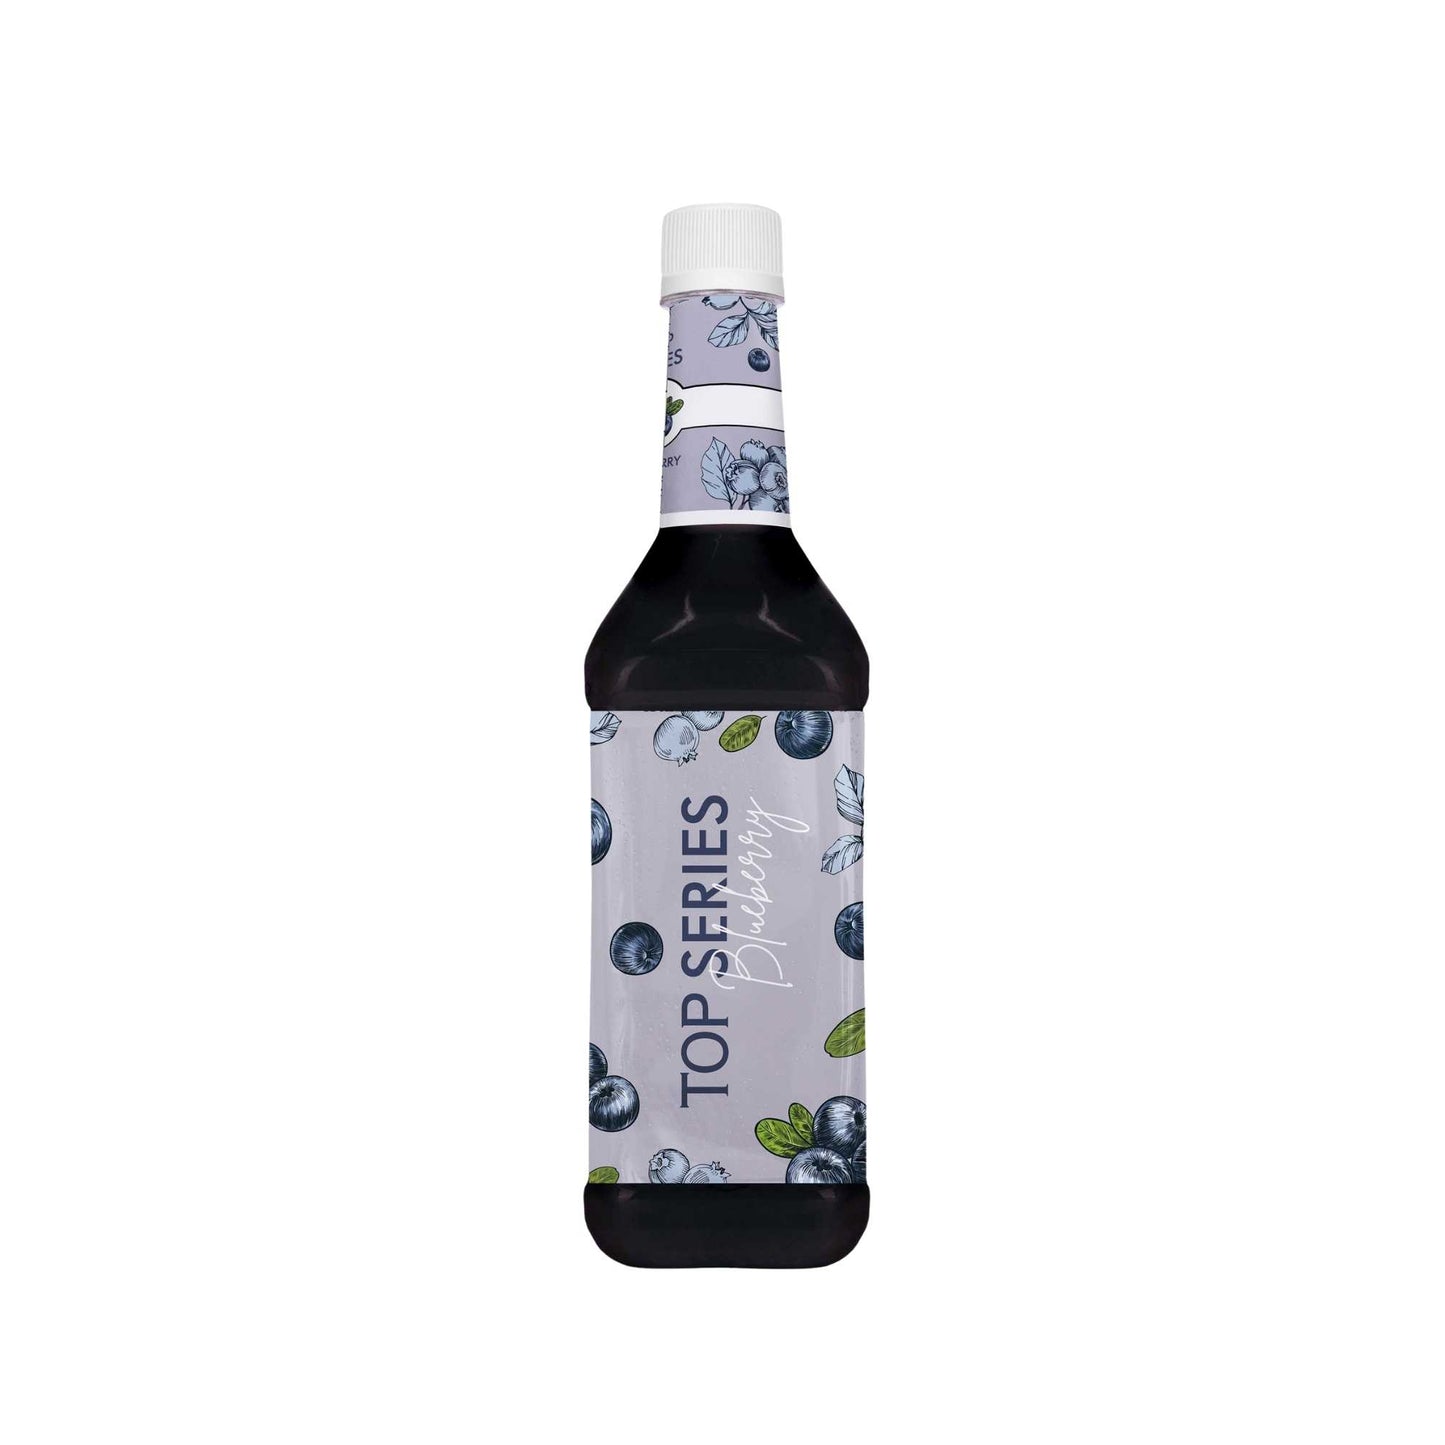 TOP Creamery Top Series Blueberry Syrup 750ml